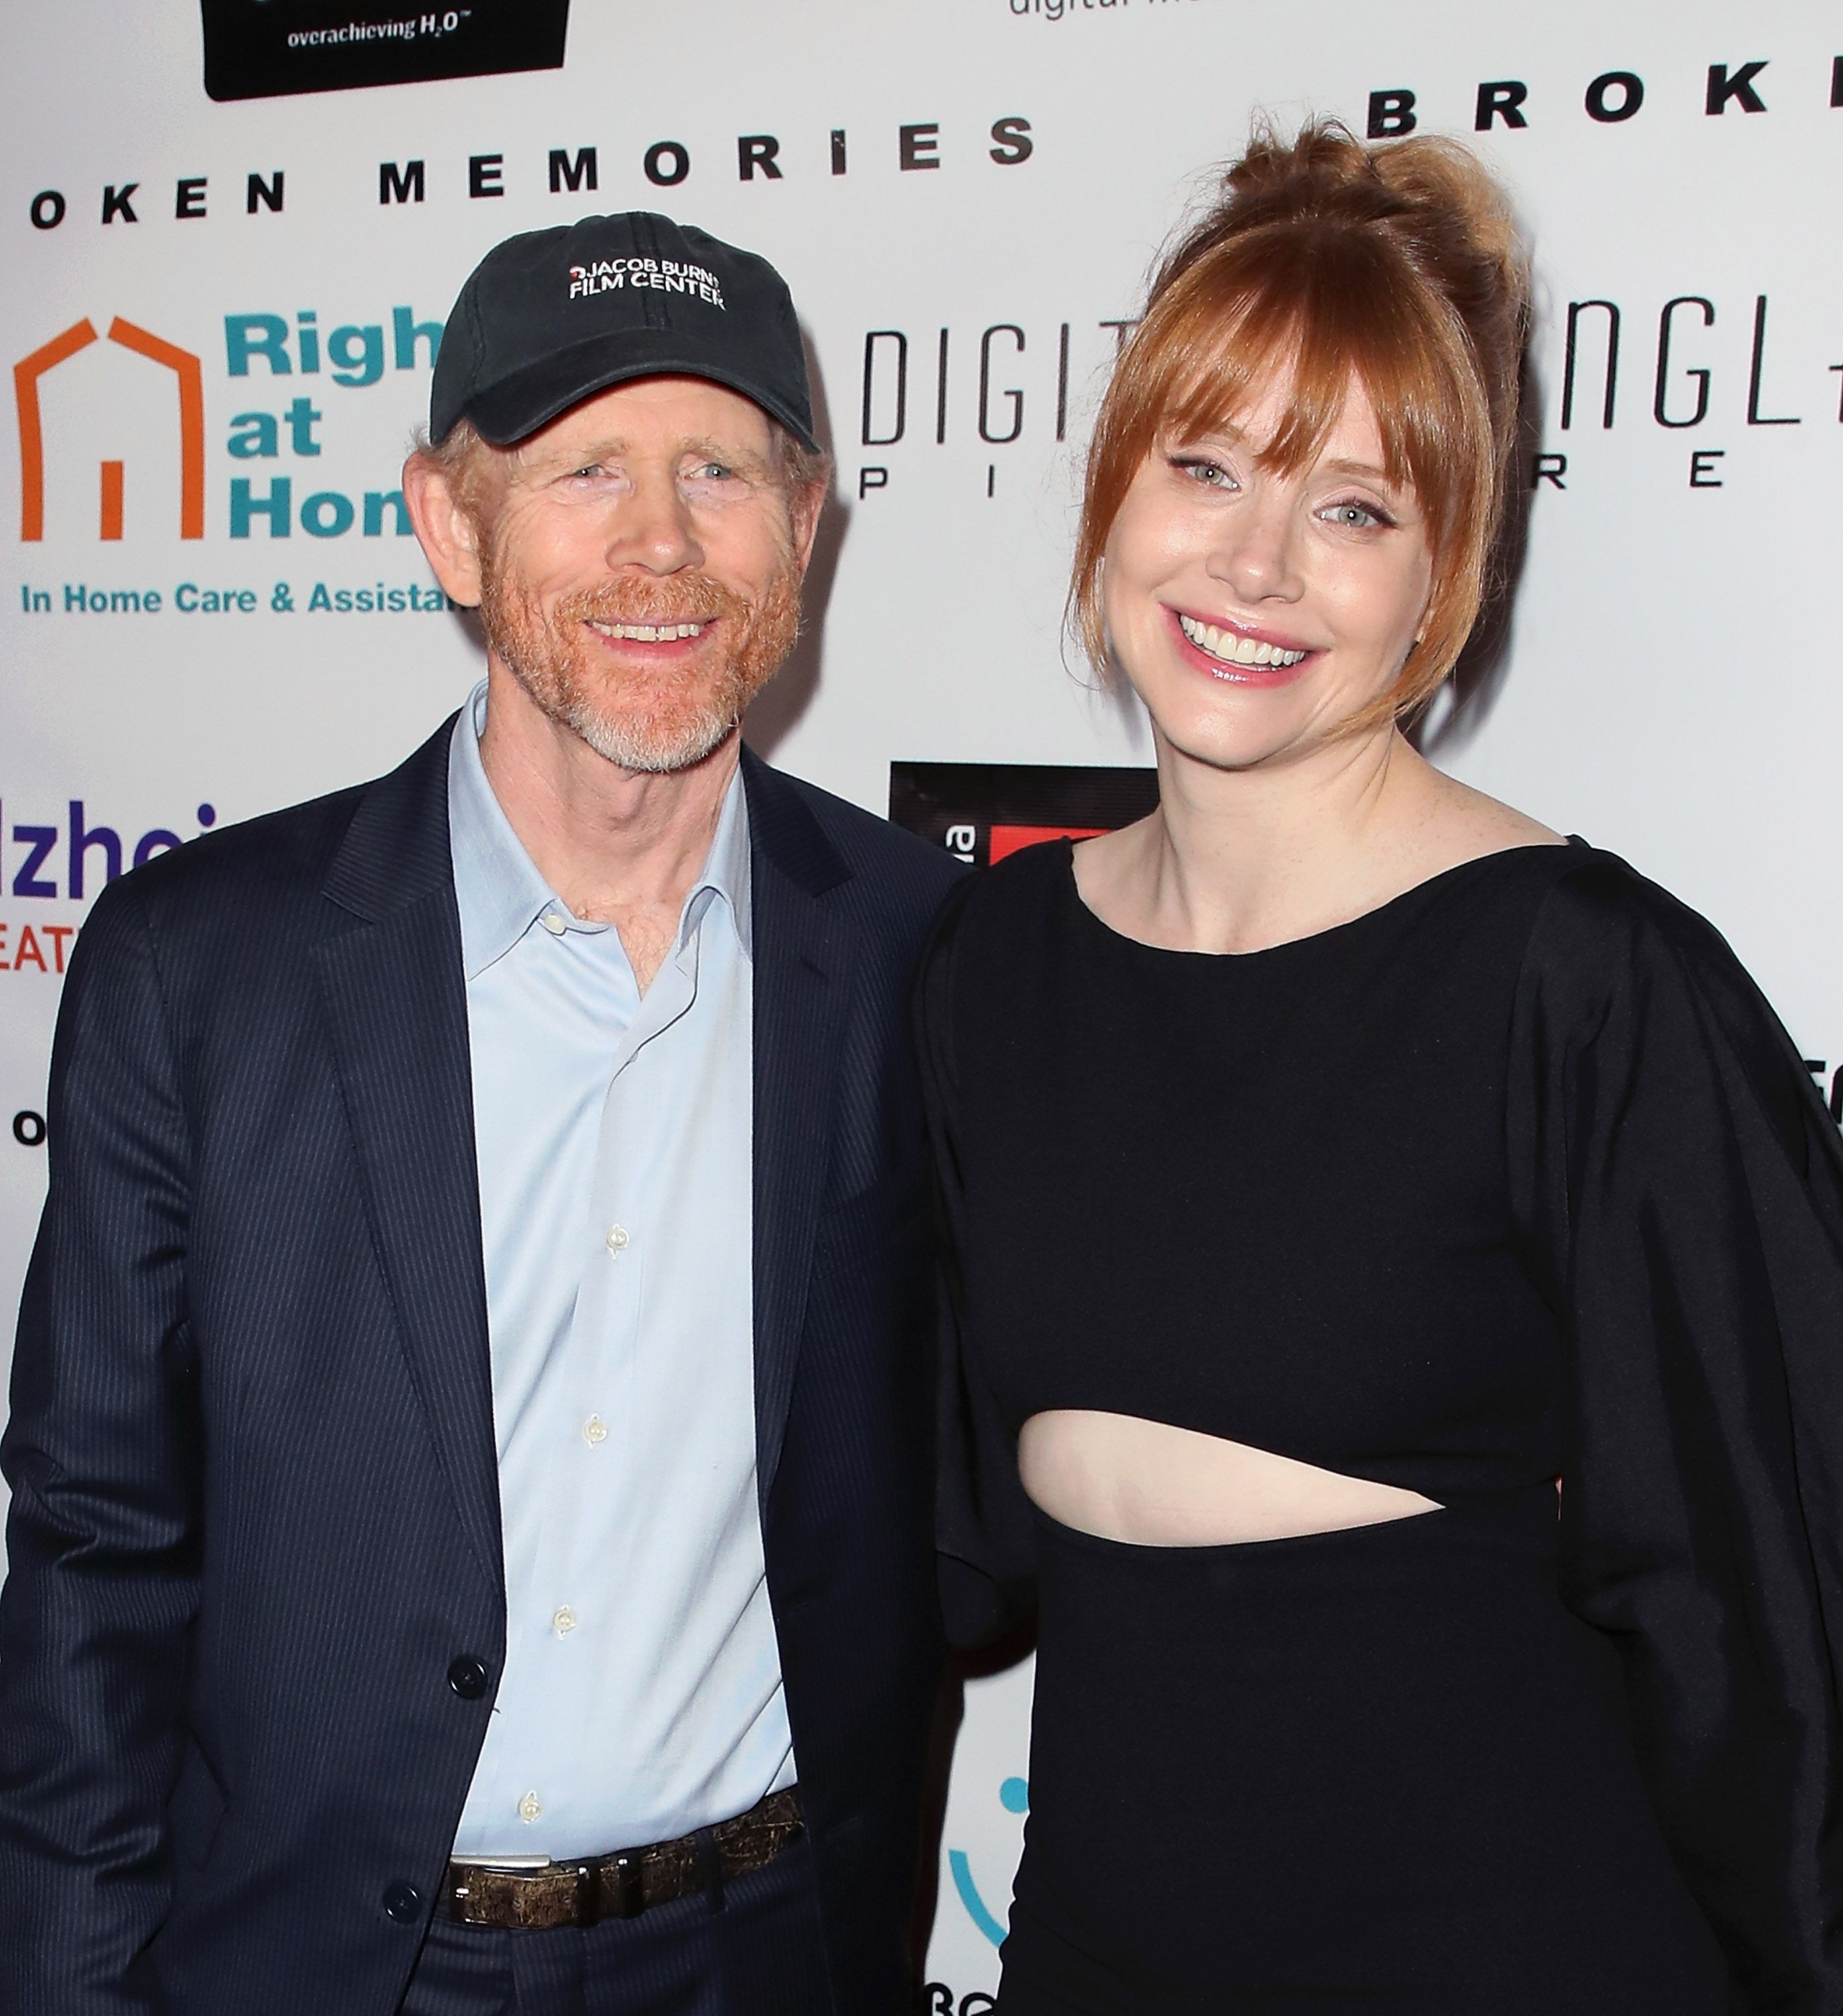 Ron Howard and his daughter Bryce Howard. | Source: Getty Images